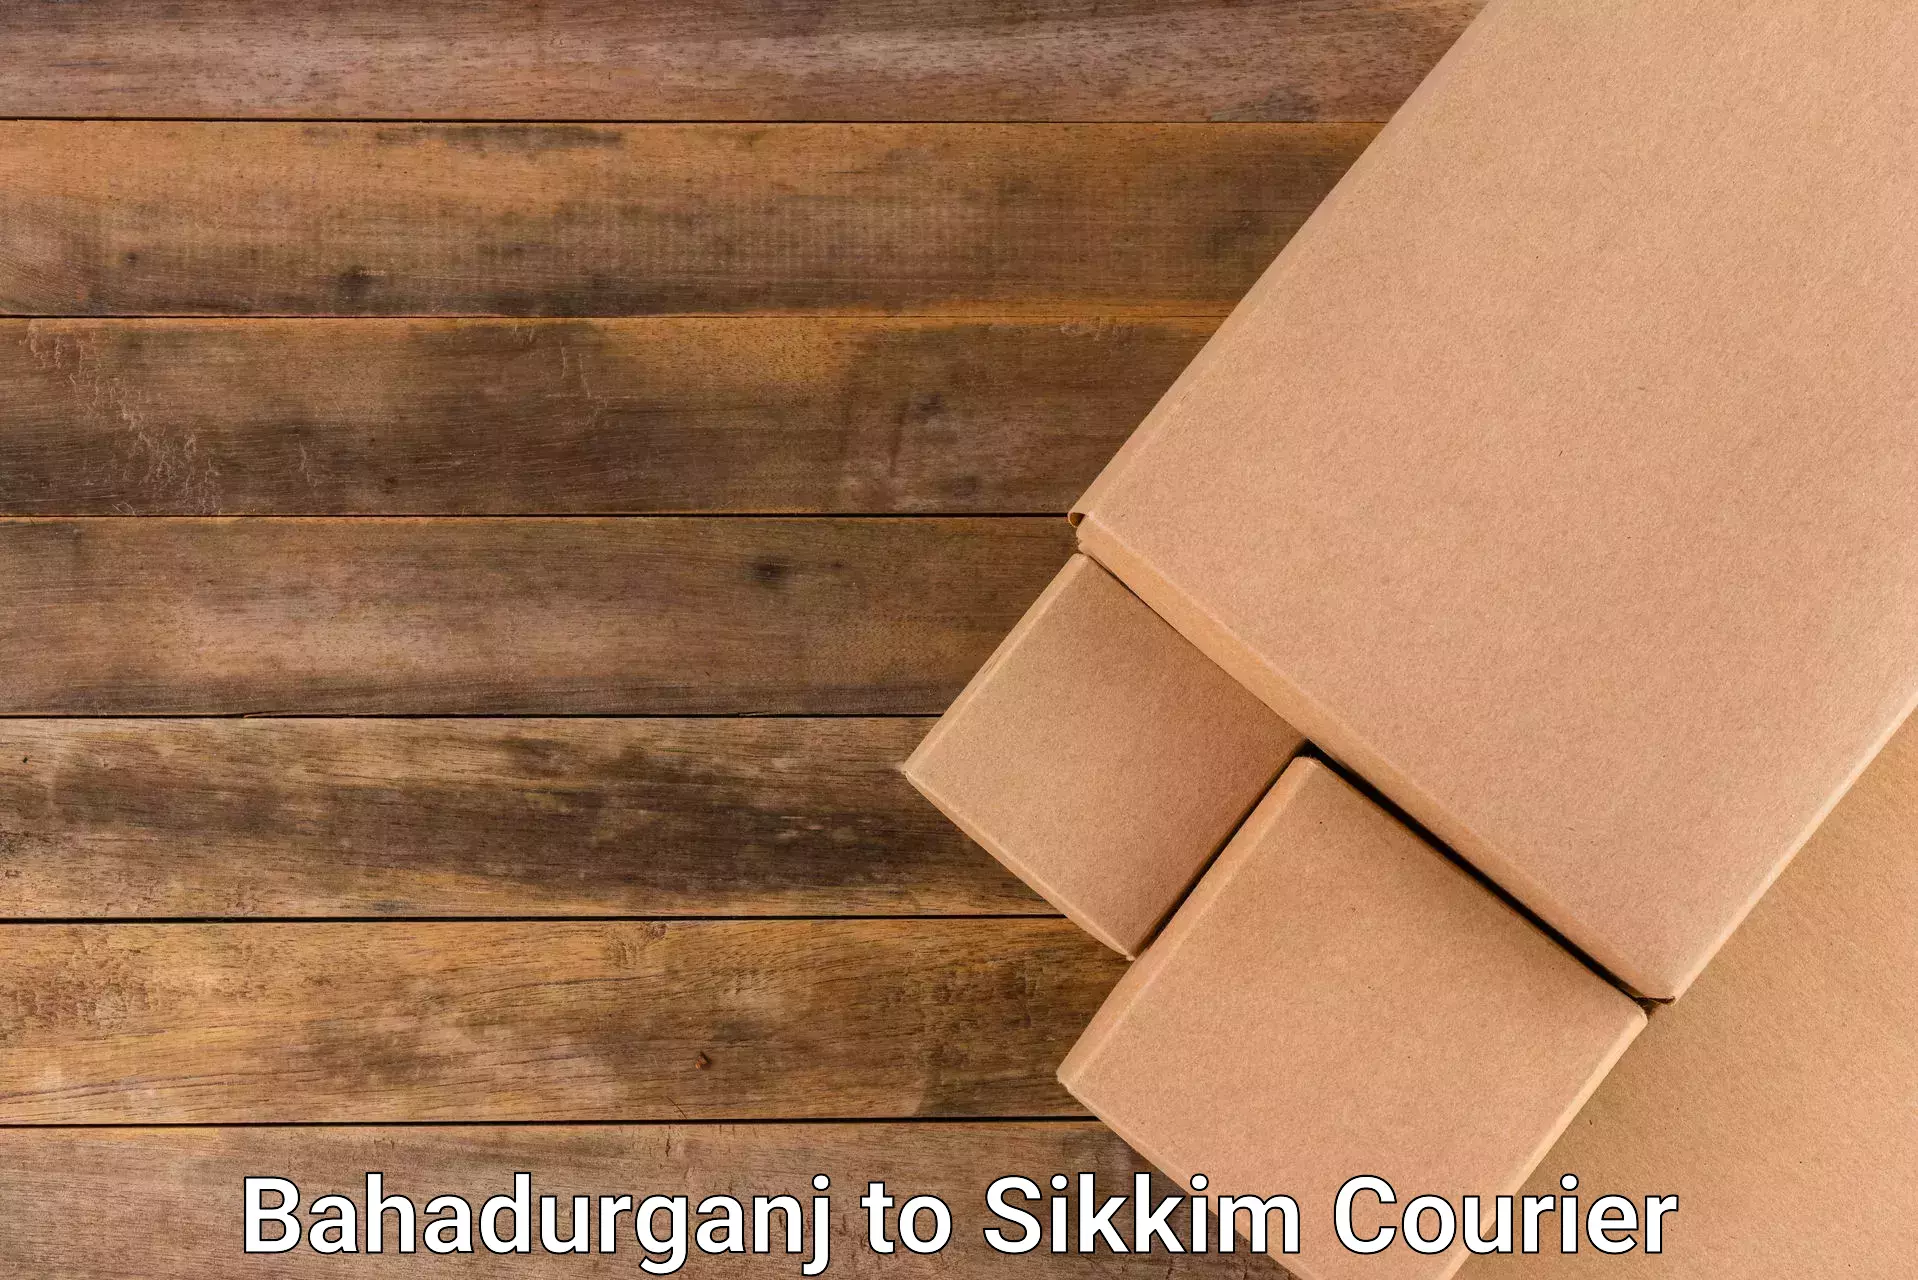 Fast delivery service Bahadurganj to South Sikkim